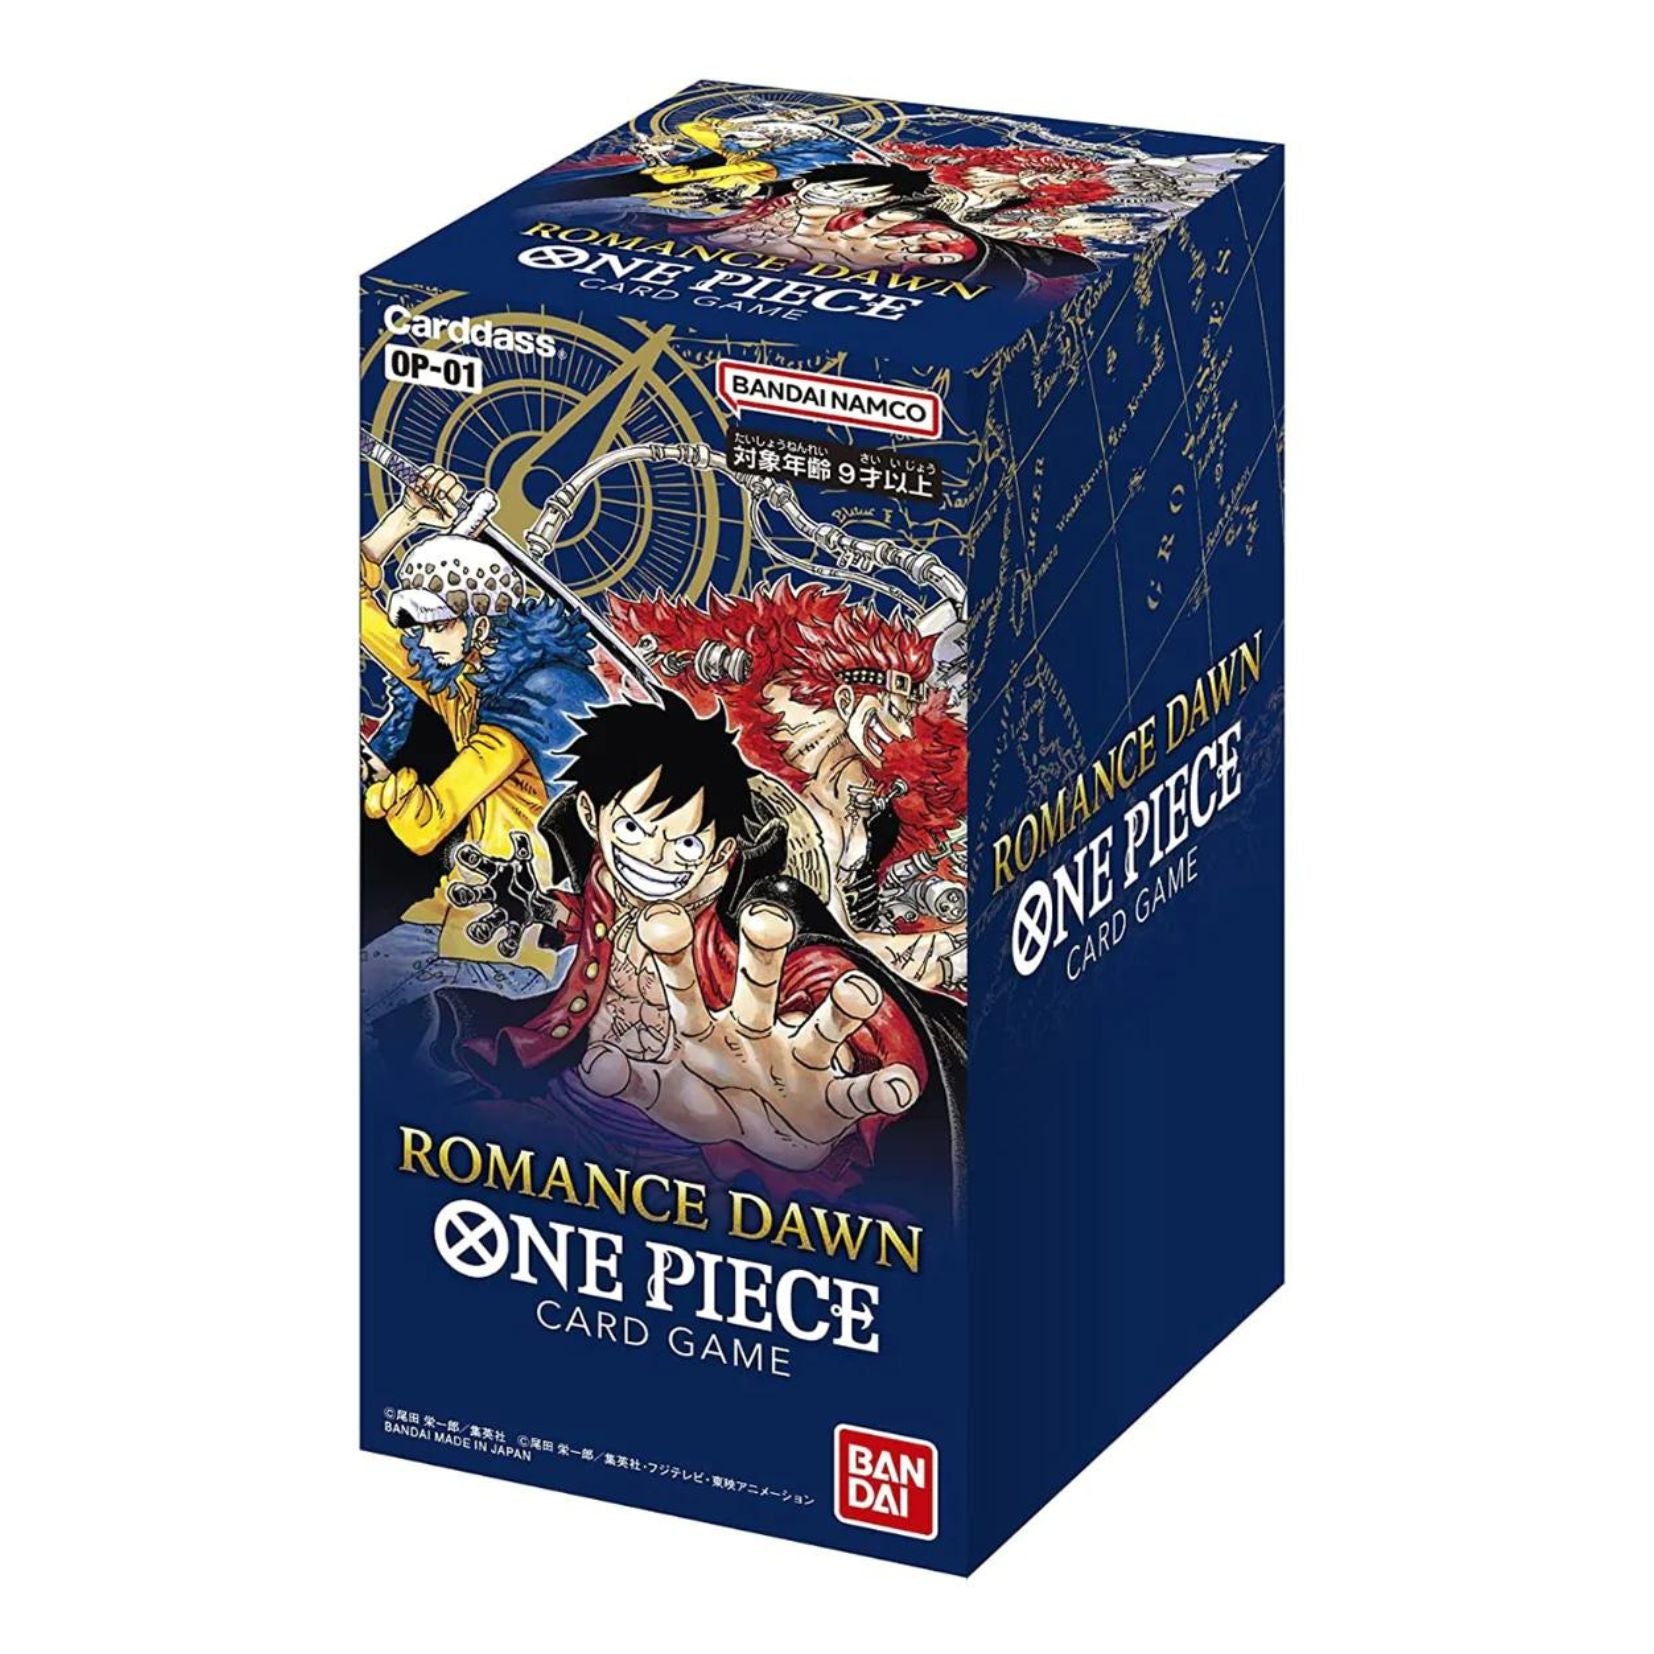 One Piece Card Game - Romance Dawn (OP-01) Booster Box [Japanese 